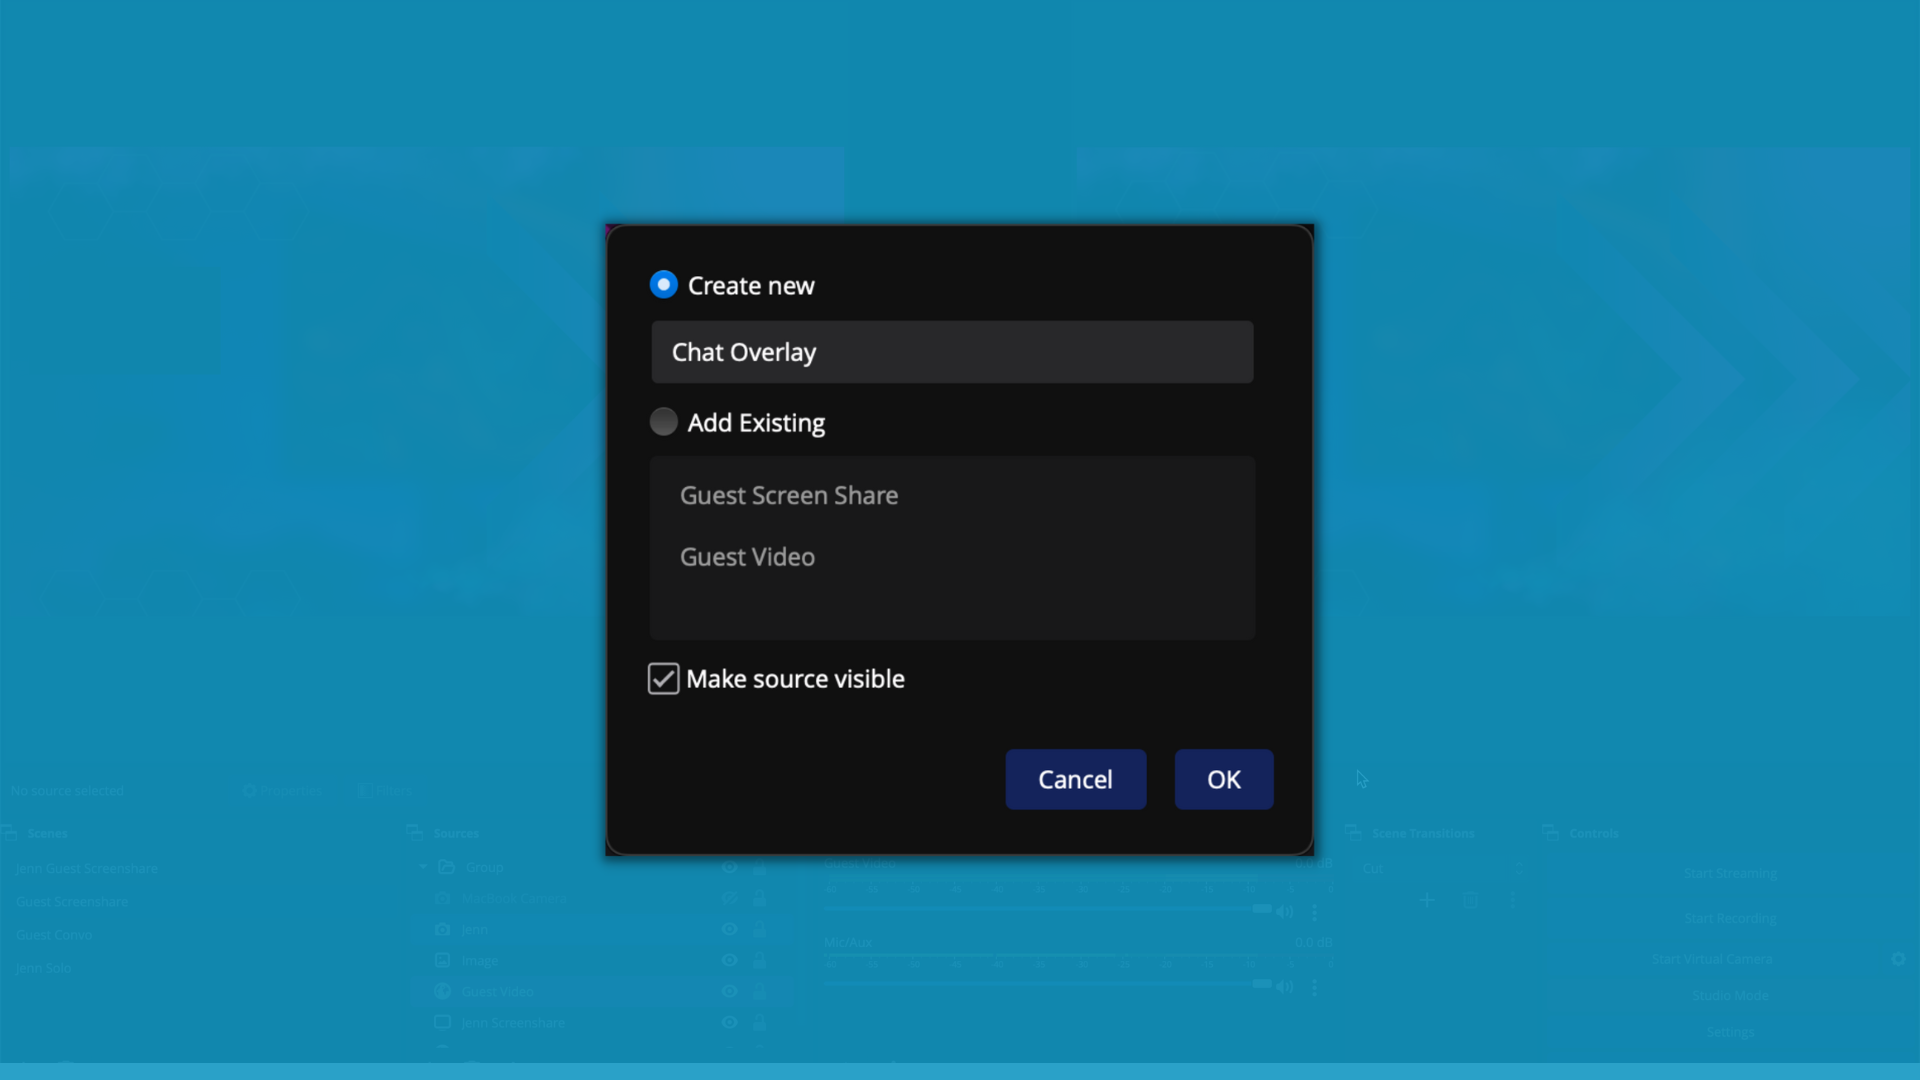 A modal dialog offers the choice to create new or add existing. "Create new" is selected, and the new scene is set to be named "Chat Overlay." A checkbox labeled "Make source visible" is checked.